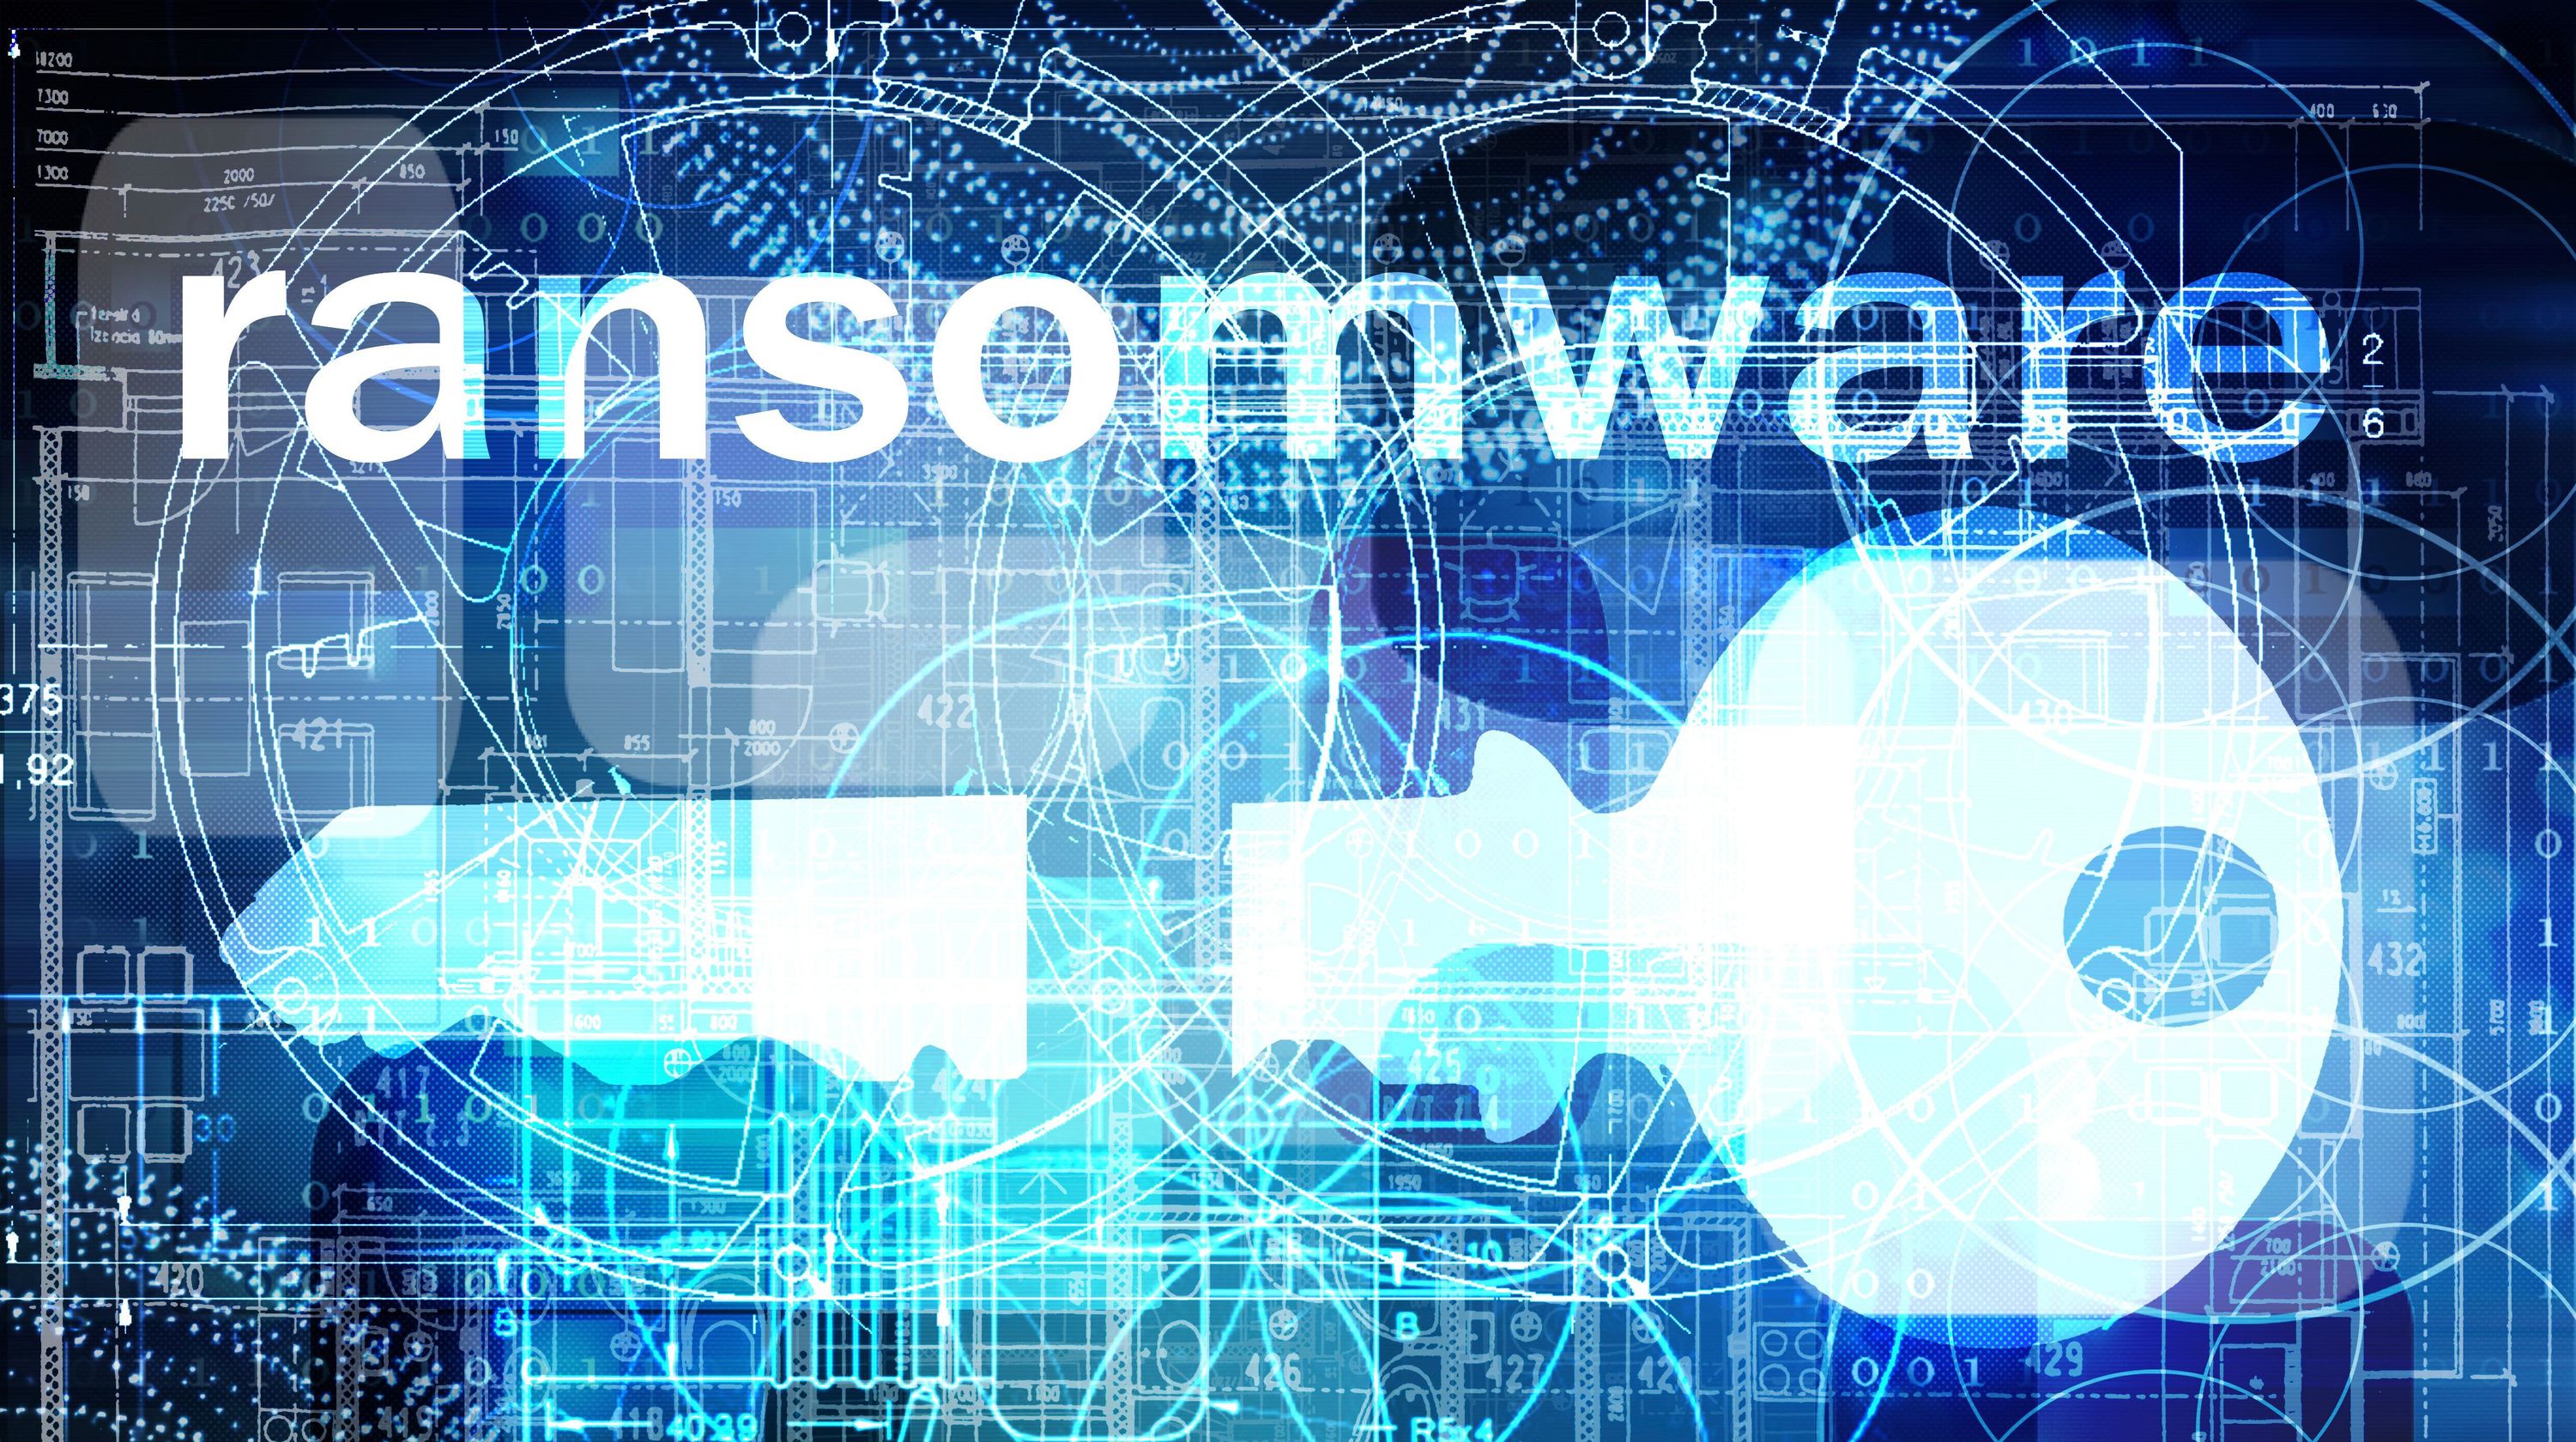 Ransomware Attacks on Businesses Increased Nearly 200% In Q1 2019